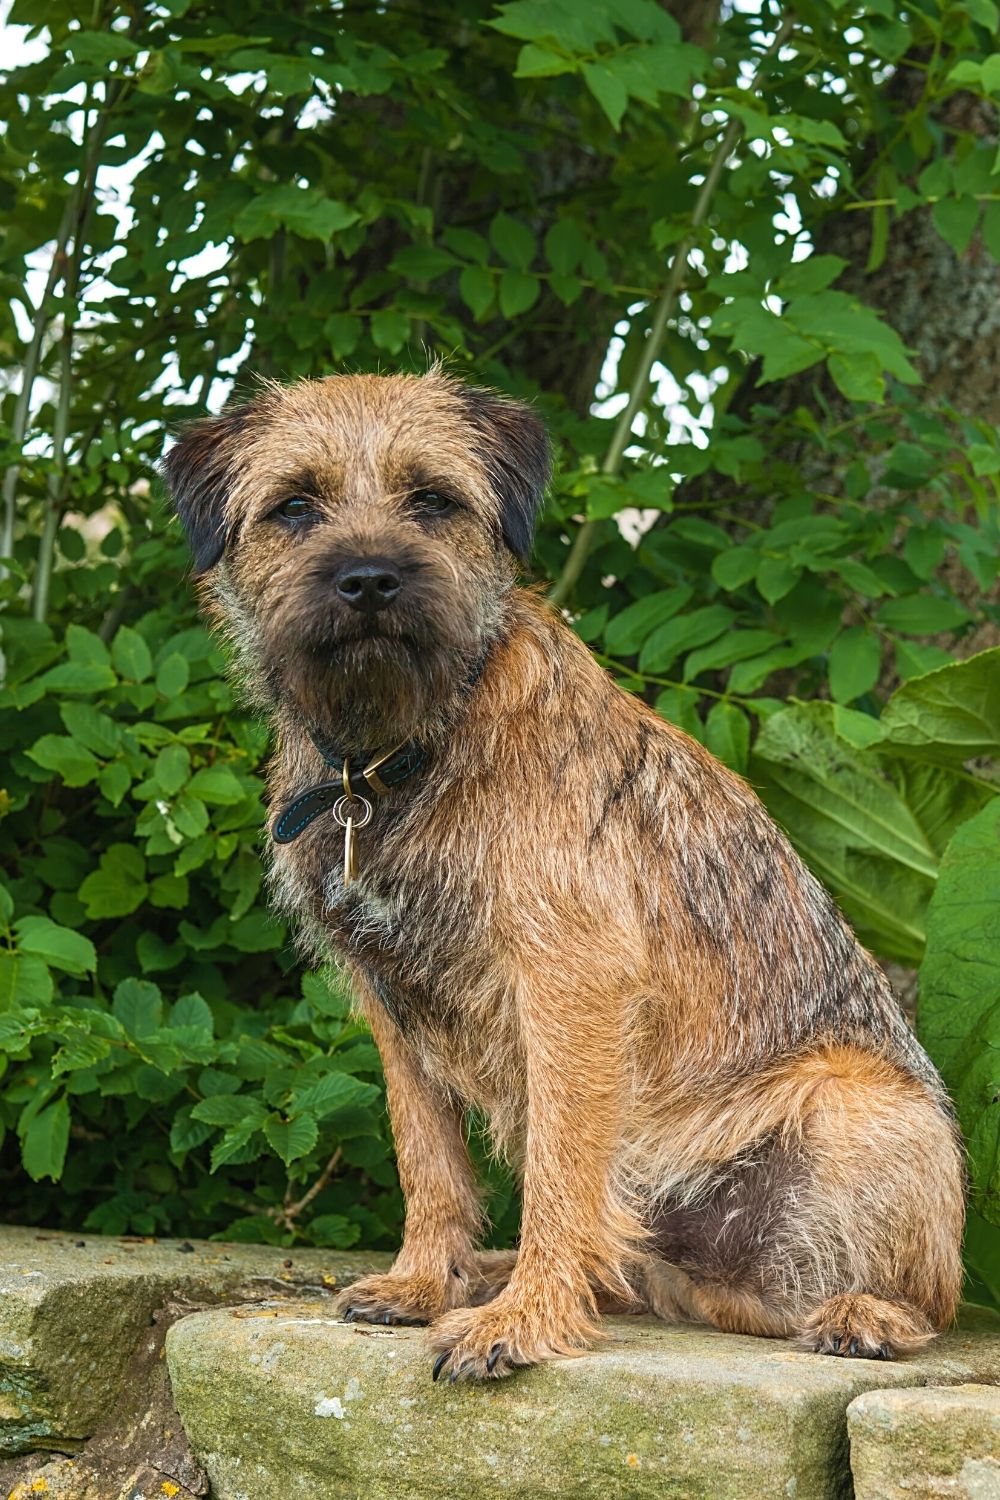 The Border Terrier, with its fluffy and scrunched-in face, is one of the breeds of dogs that look like Ewoks from Star Wars